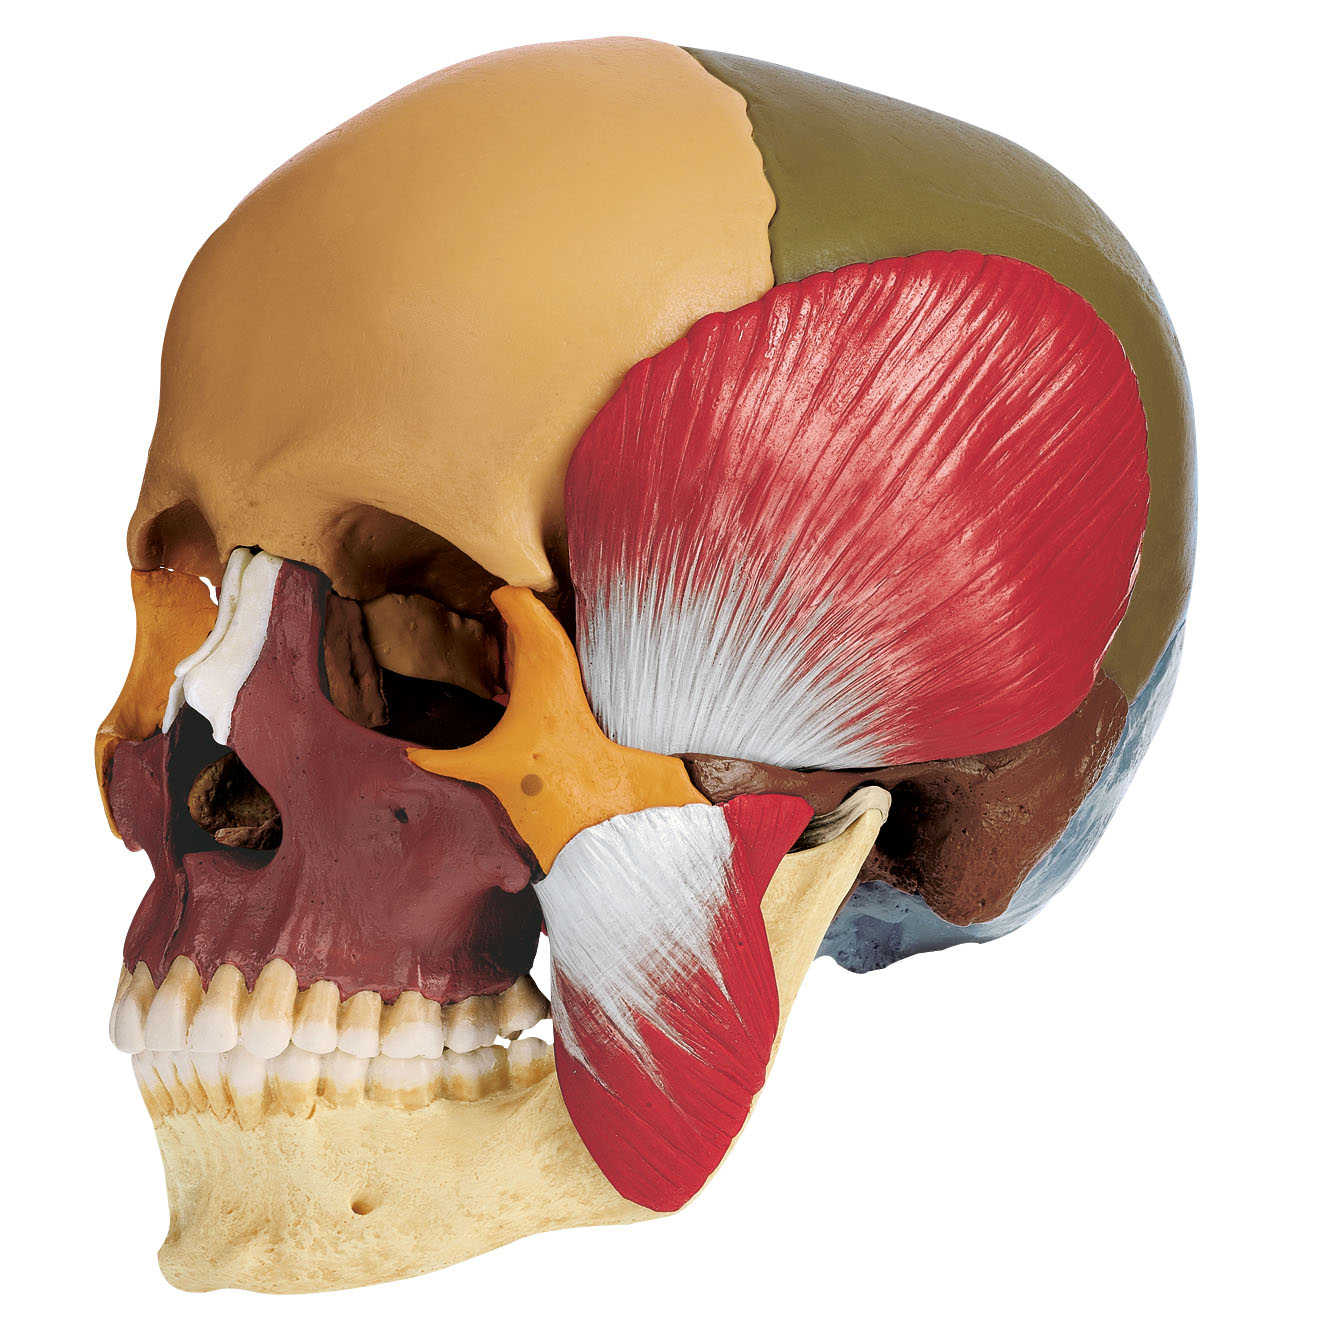 14 Part Coloured Skull + Muscles of Mastication